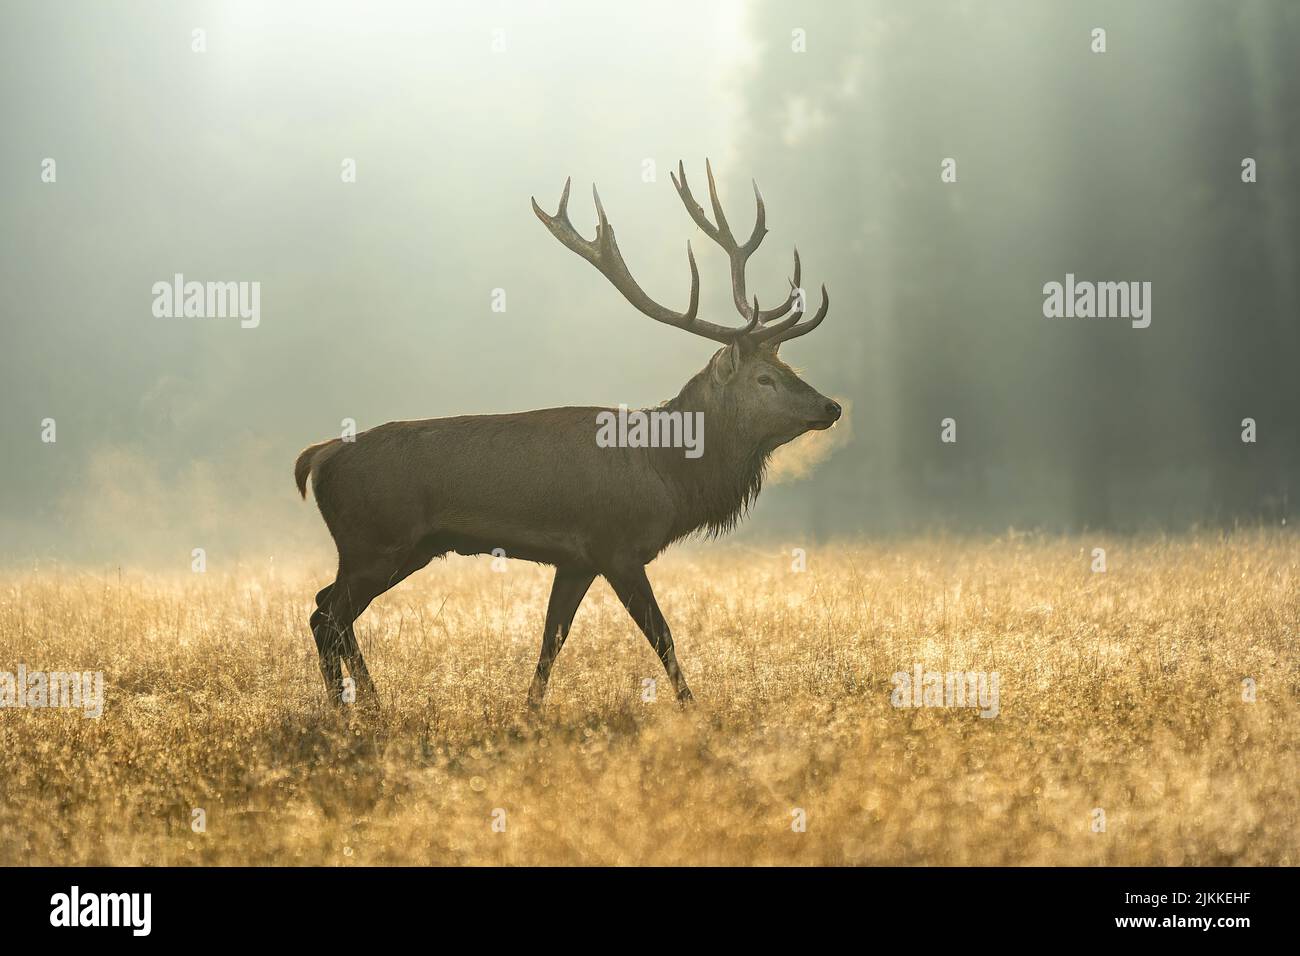 A deer with antlers walking around in Richmond park during sunrise Stock Photo